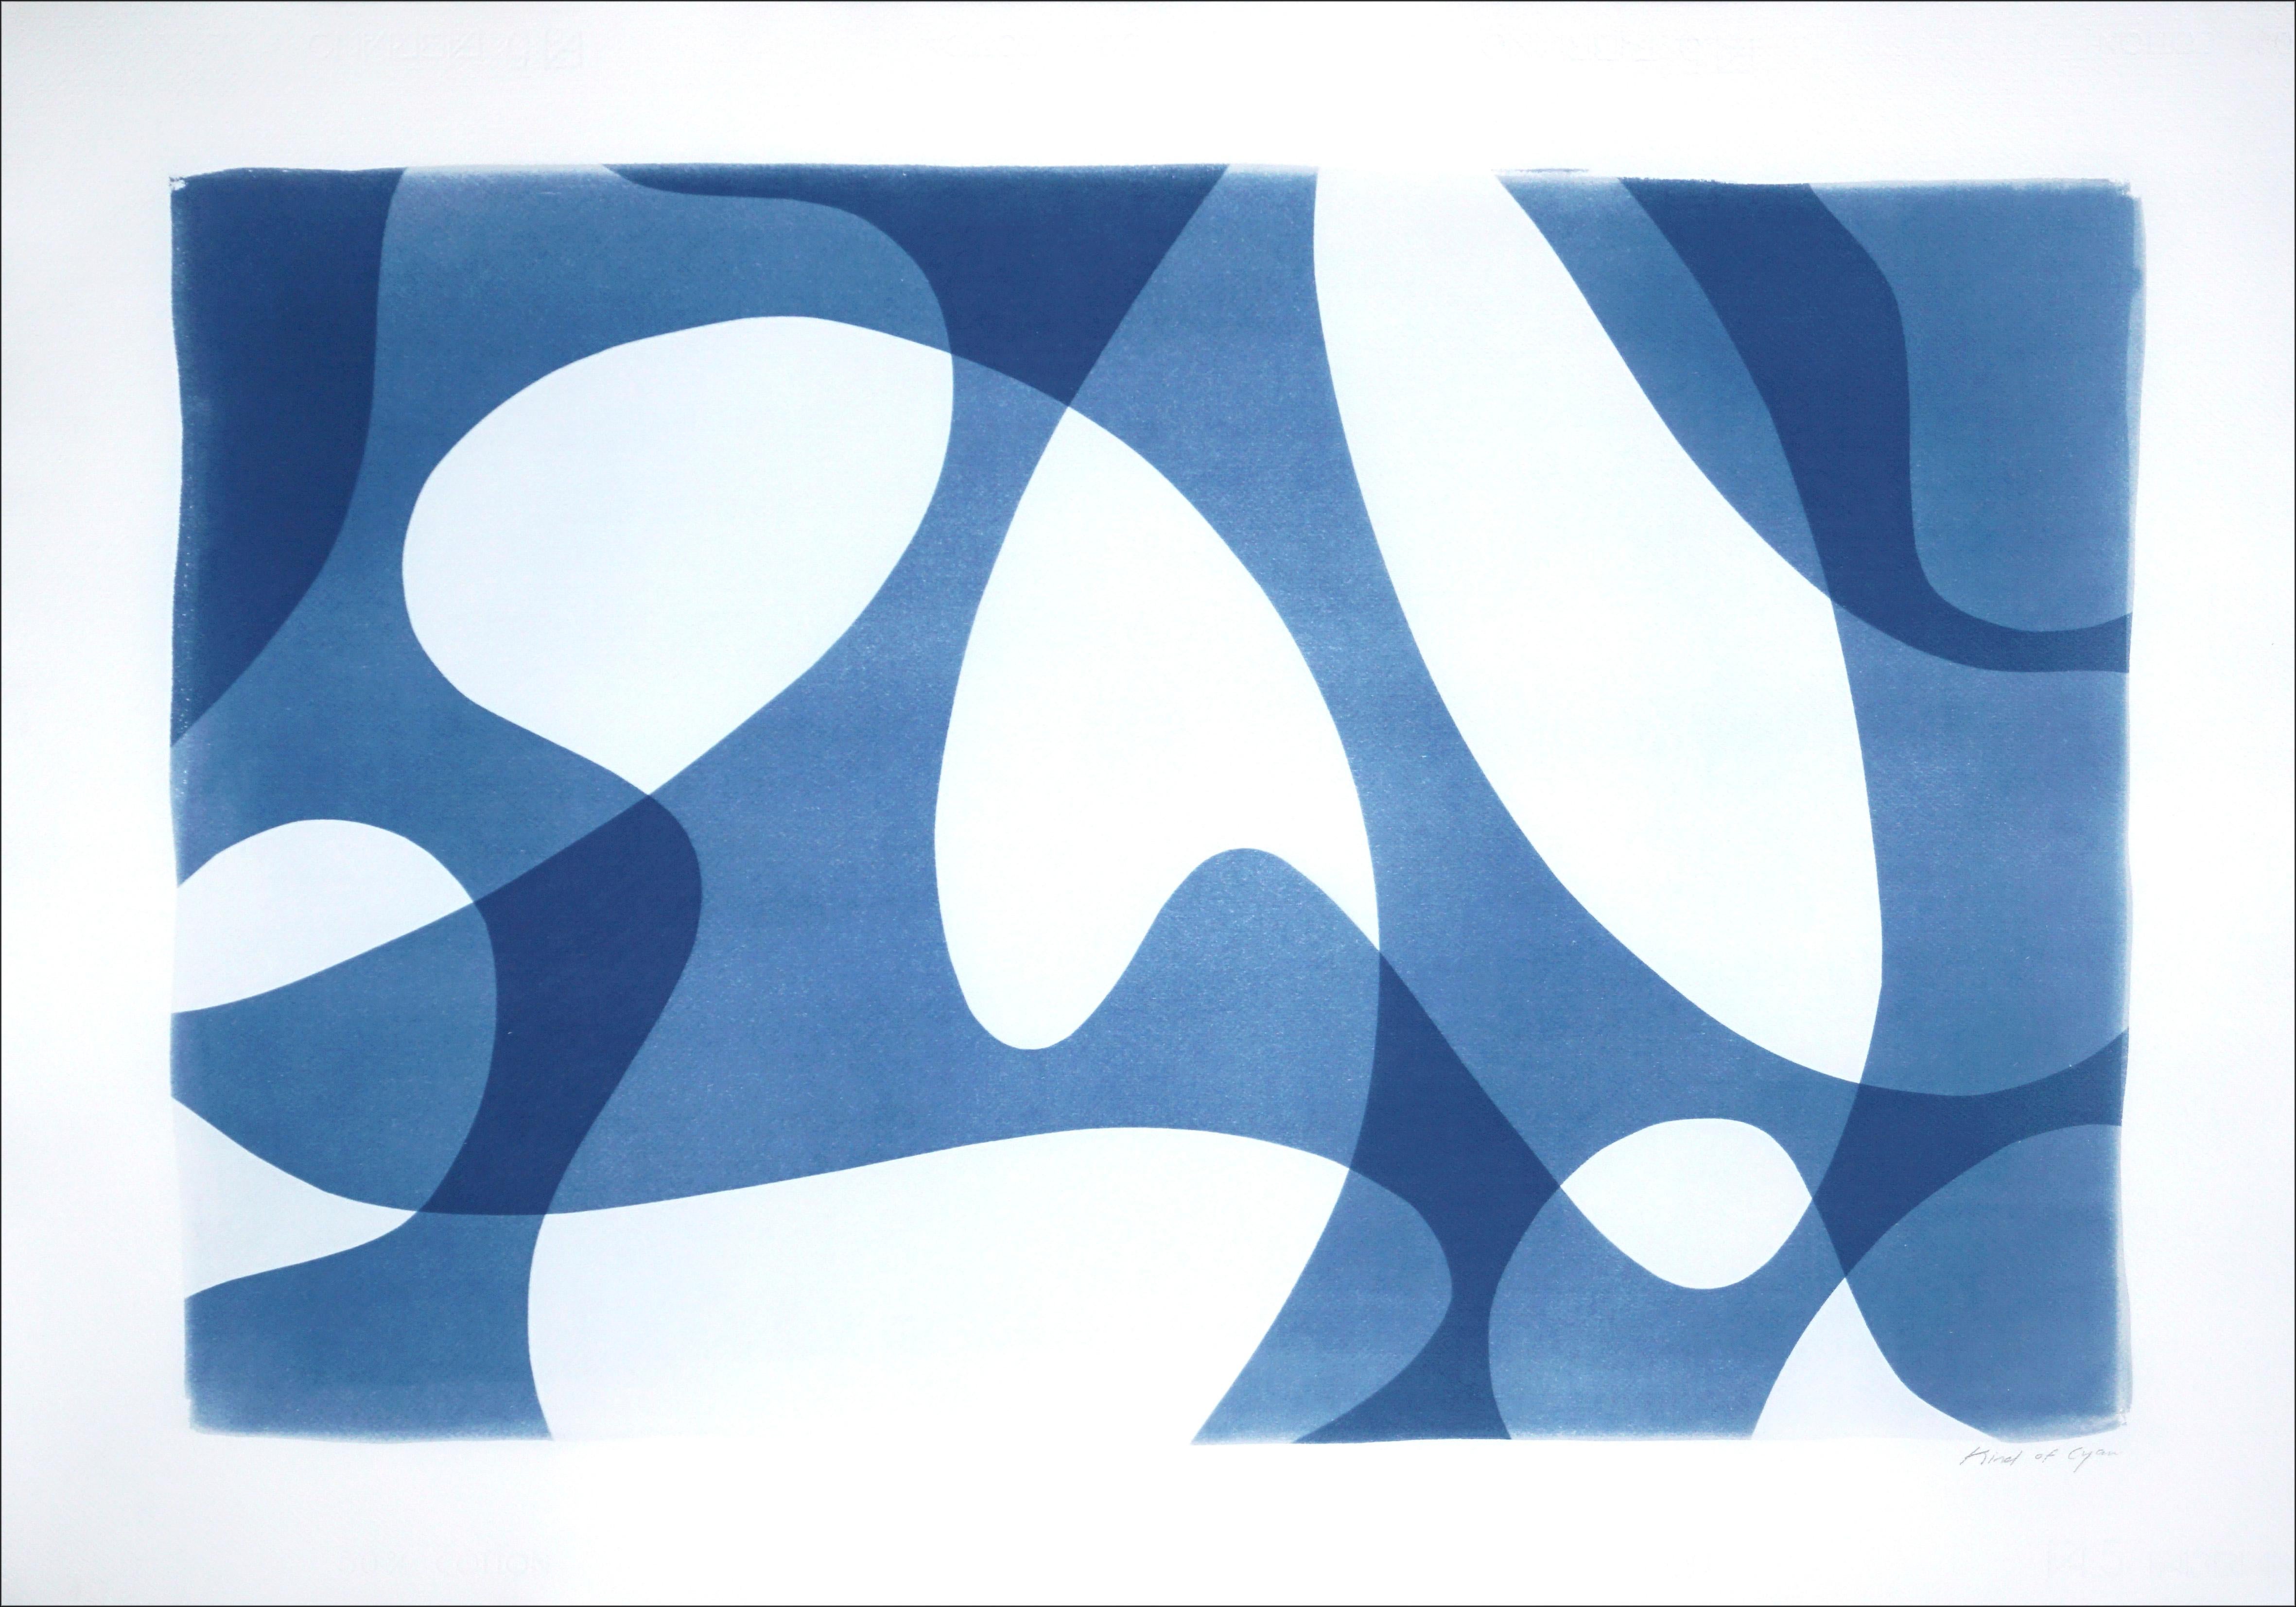 Vanguard Shapes and Shadows, Horizontal Organic Forms, White and Blue Monotype